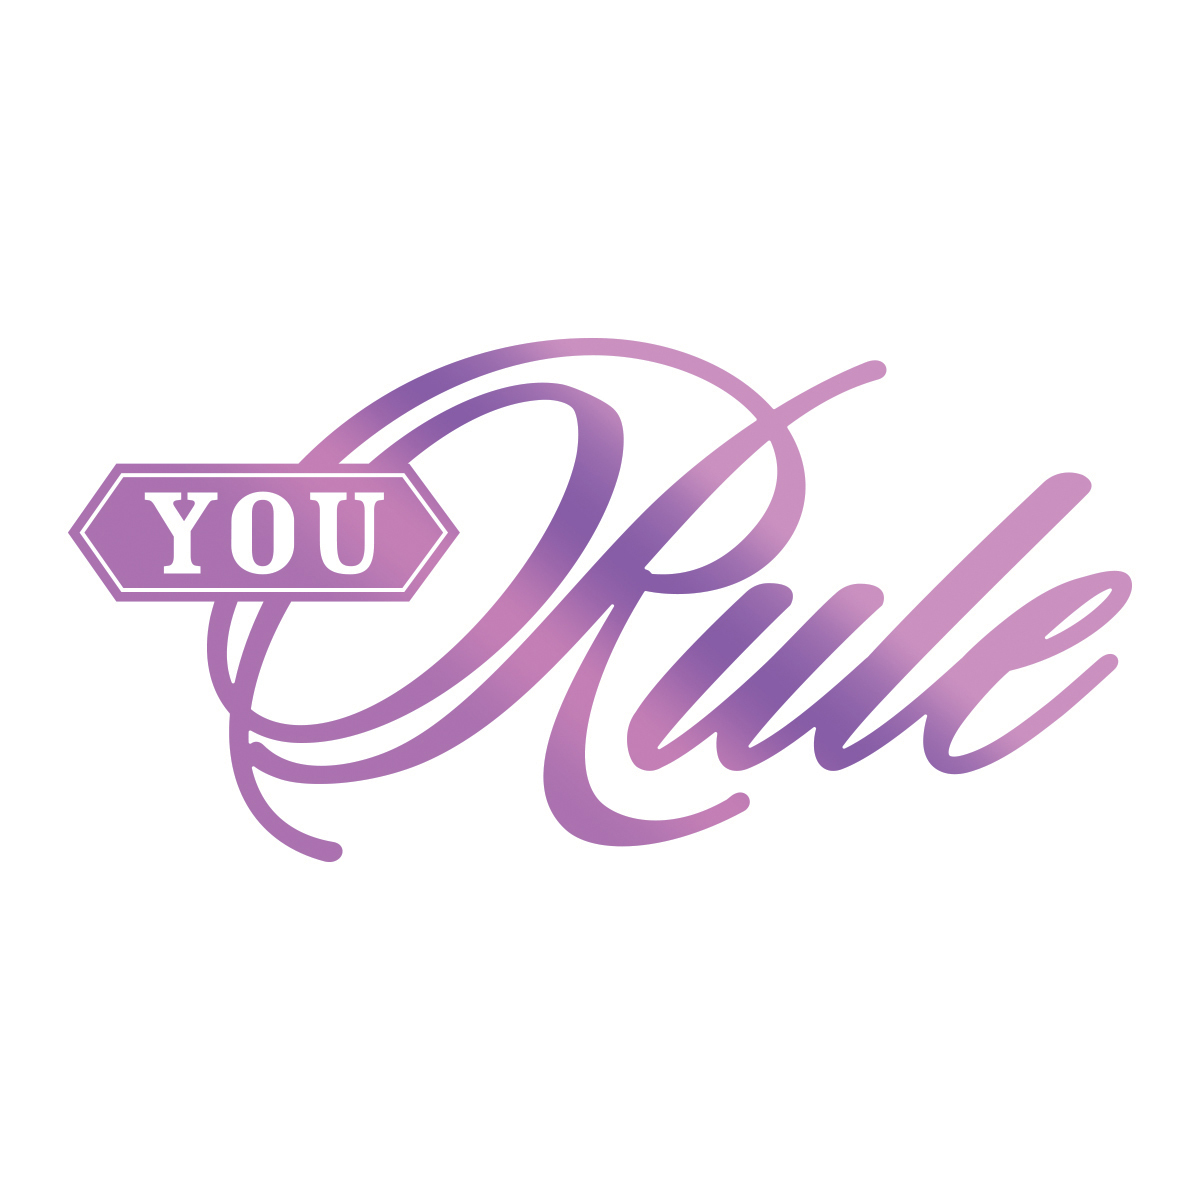 Couture Creations Hotfoil Stamp Sentiment You Rule